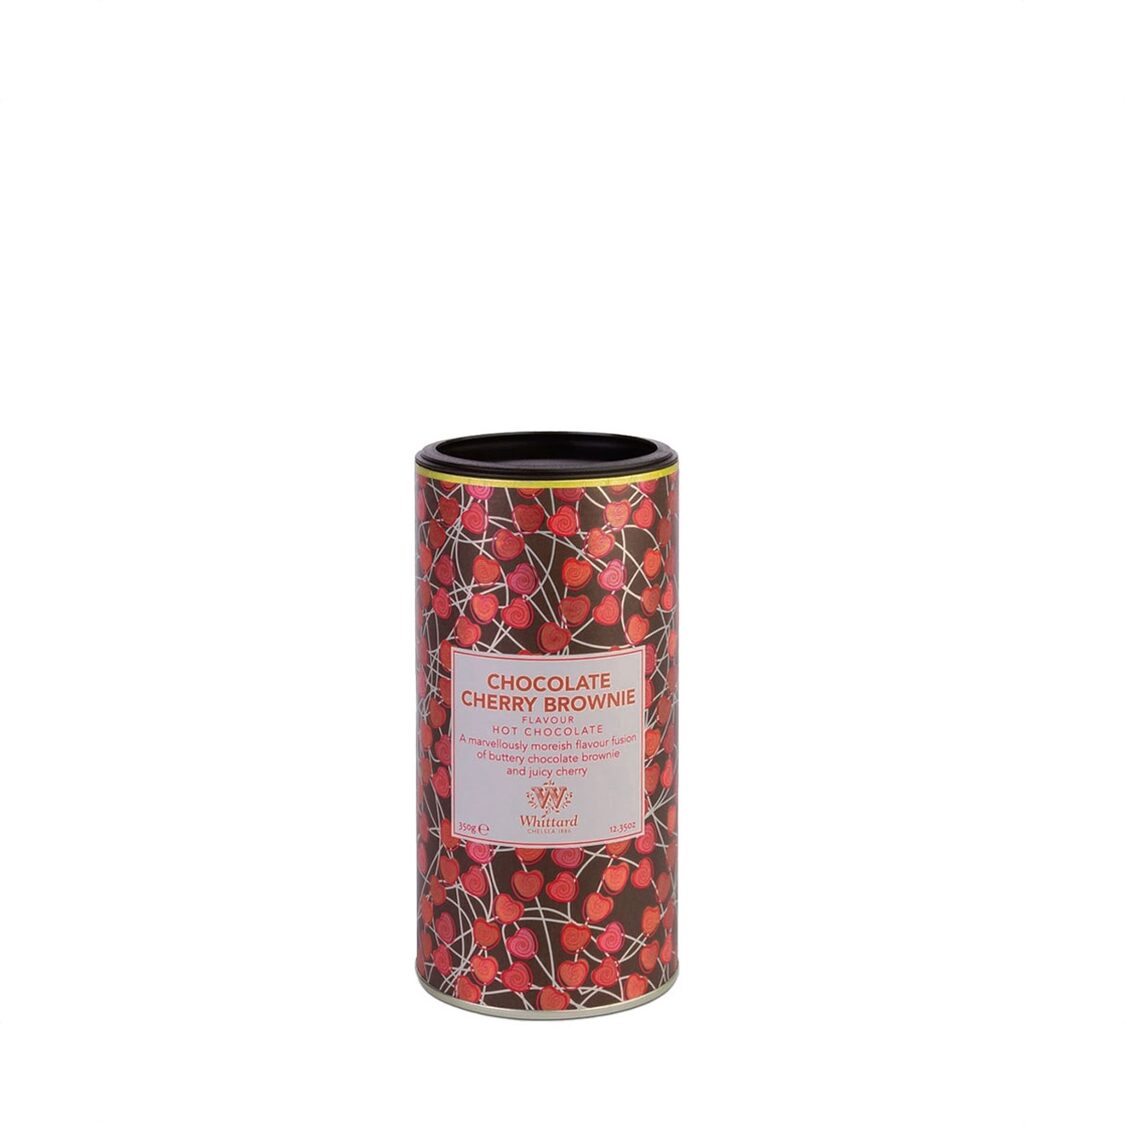 Whittard Limited Edition Chocolate Cherry Brownie Flavour Hot Chocolate 350g